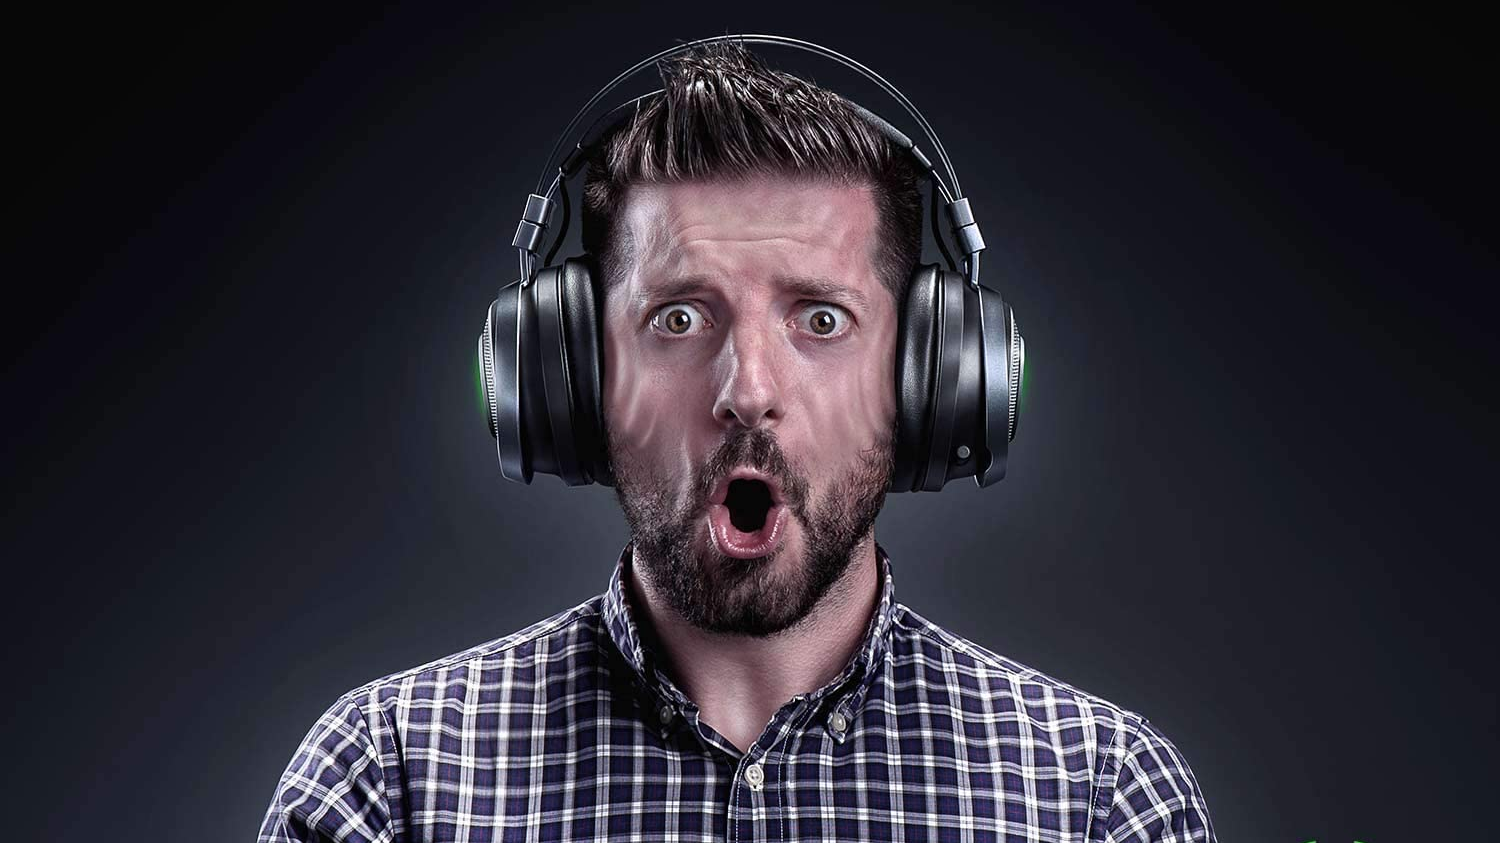 Gamer's face while wearing headphones